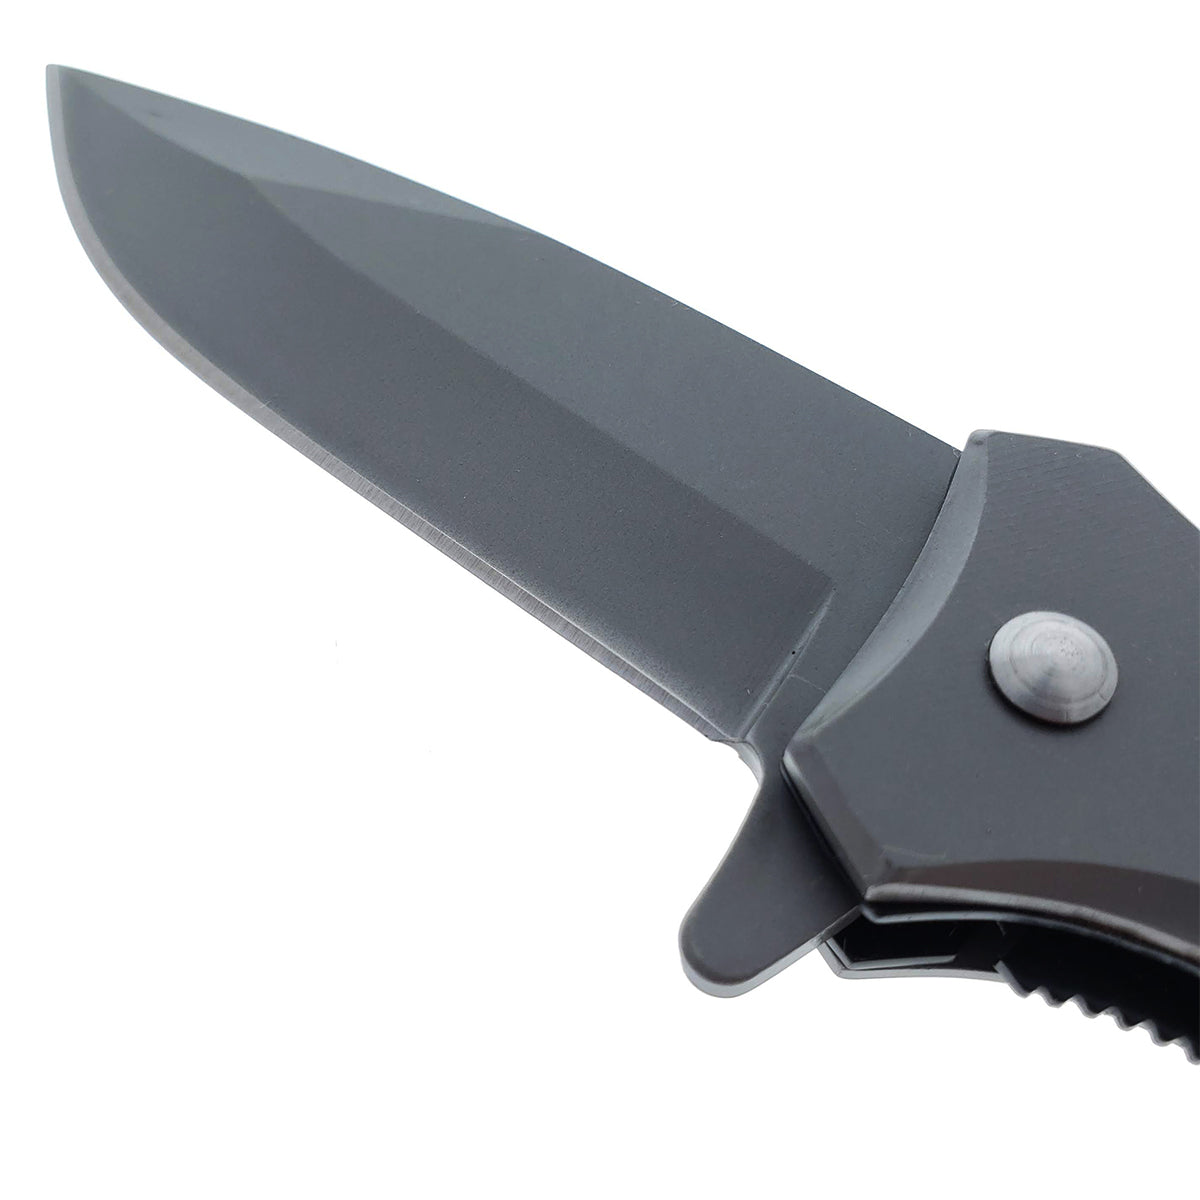 Falcon 6.5" Overall Spring Assisted Knife W/Seat Belt Cutter And Window Breaker Grey